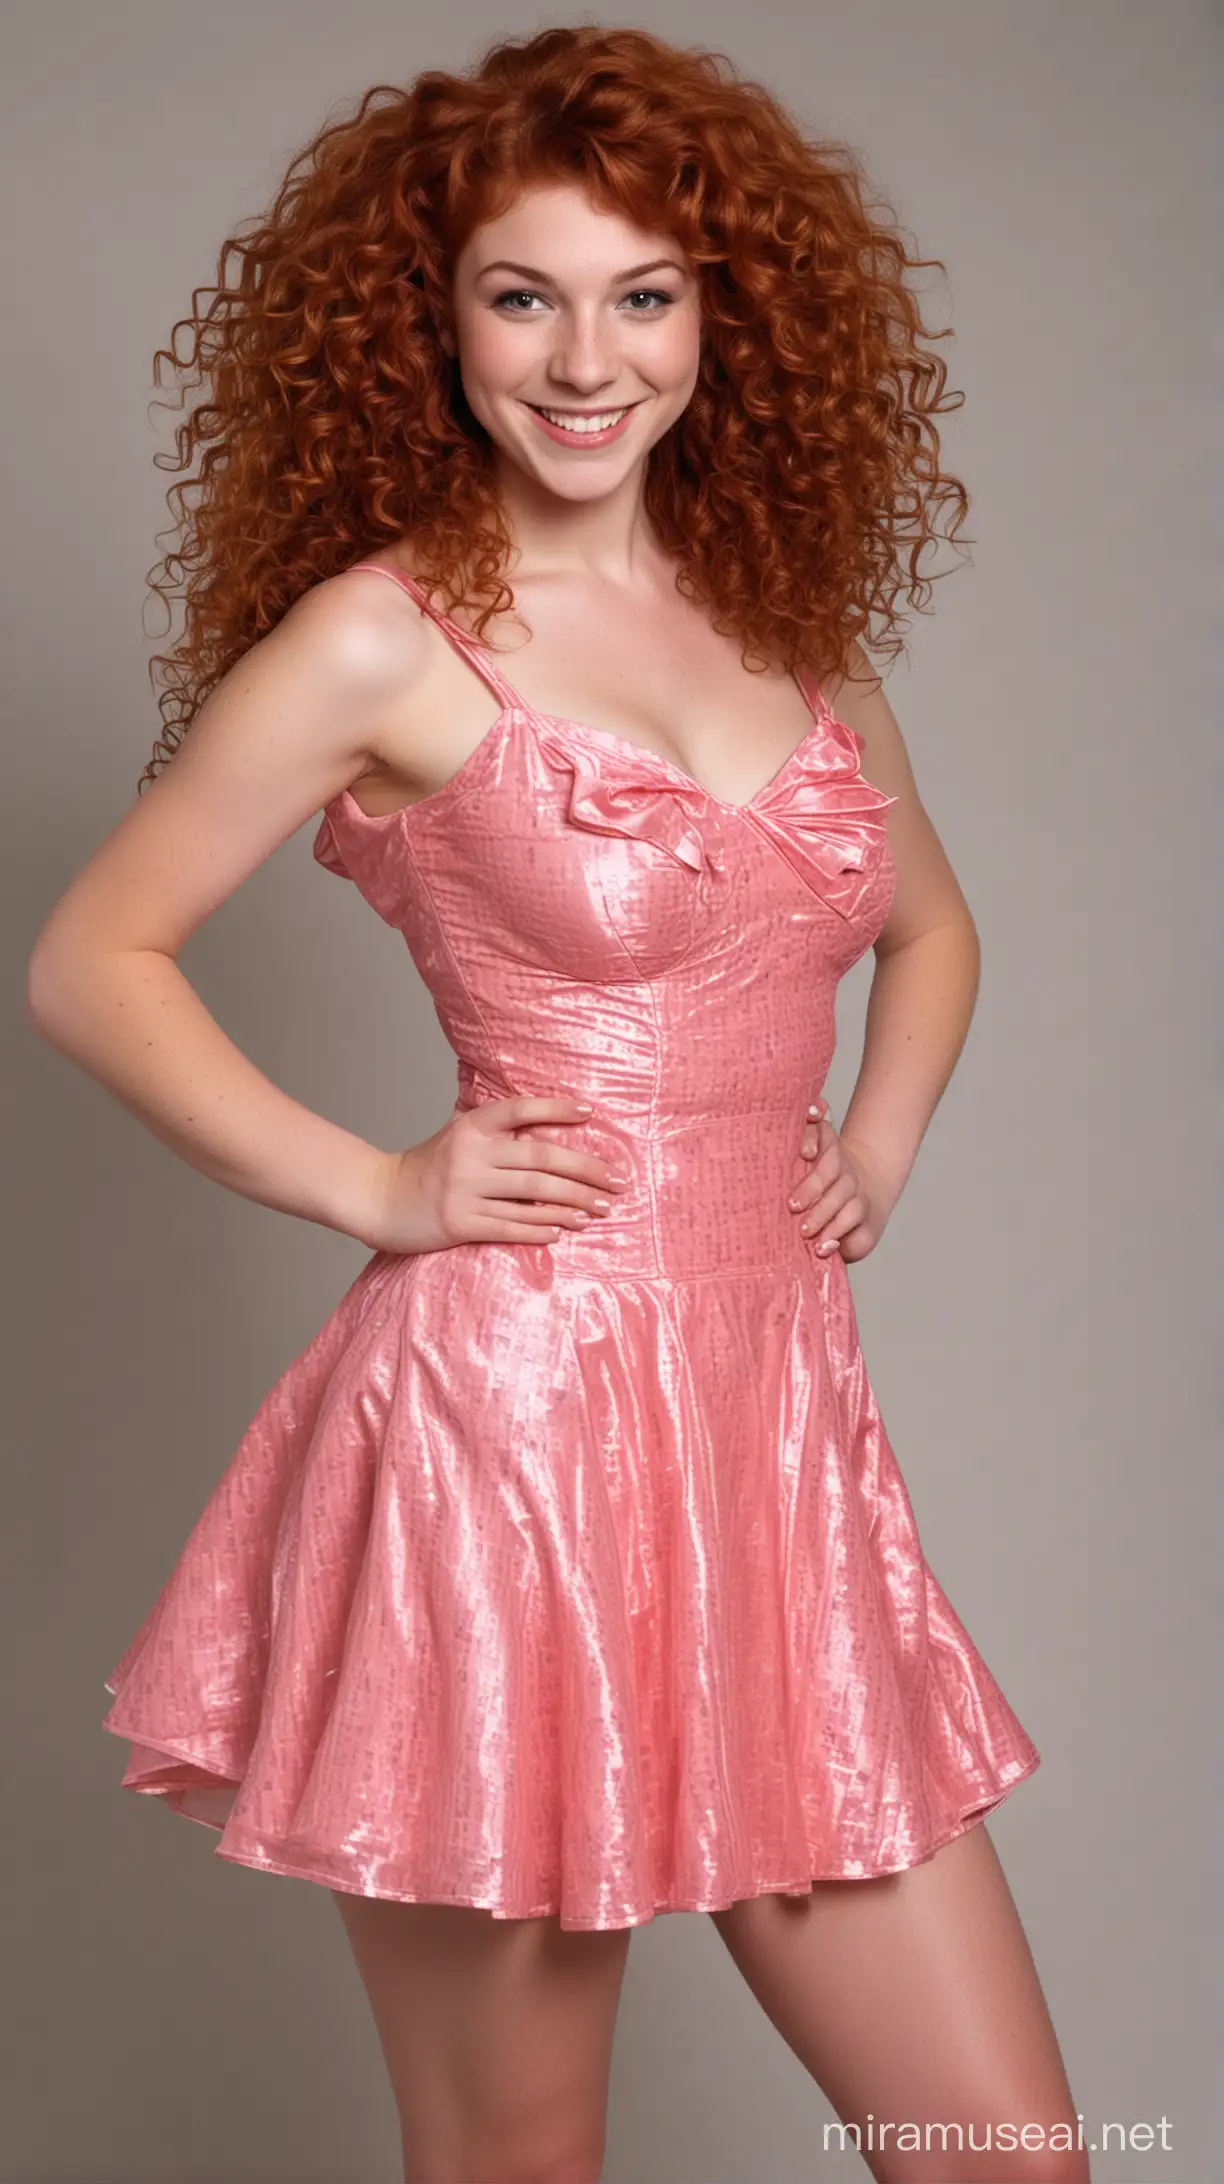 1980s Style High School Trans Girl with Bold Red Curls and Party Outfit